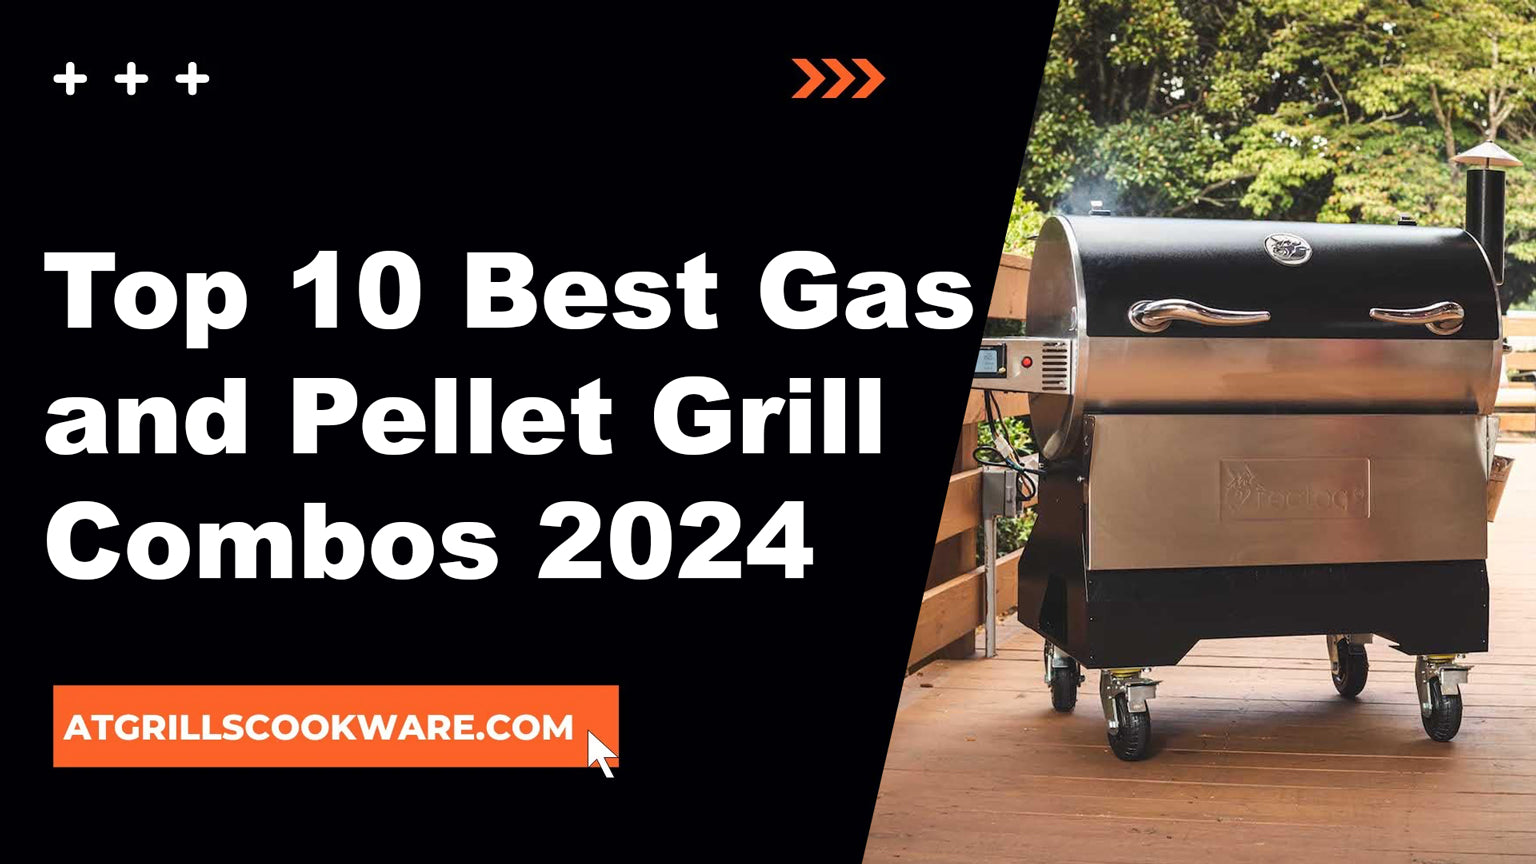 Top 10 Best Gas and Pellet Grill Combos 2024 - ATGRILLS